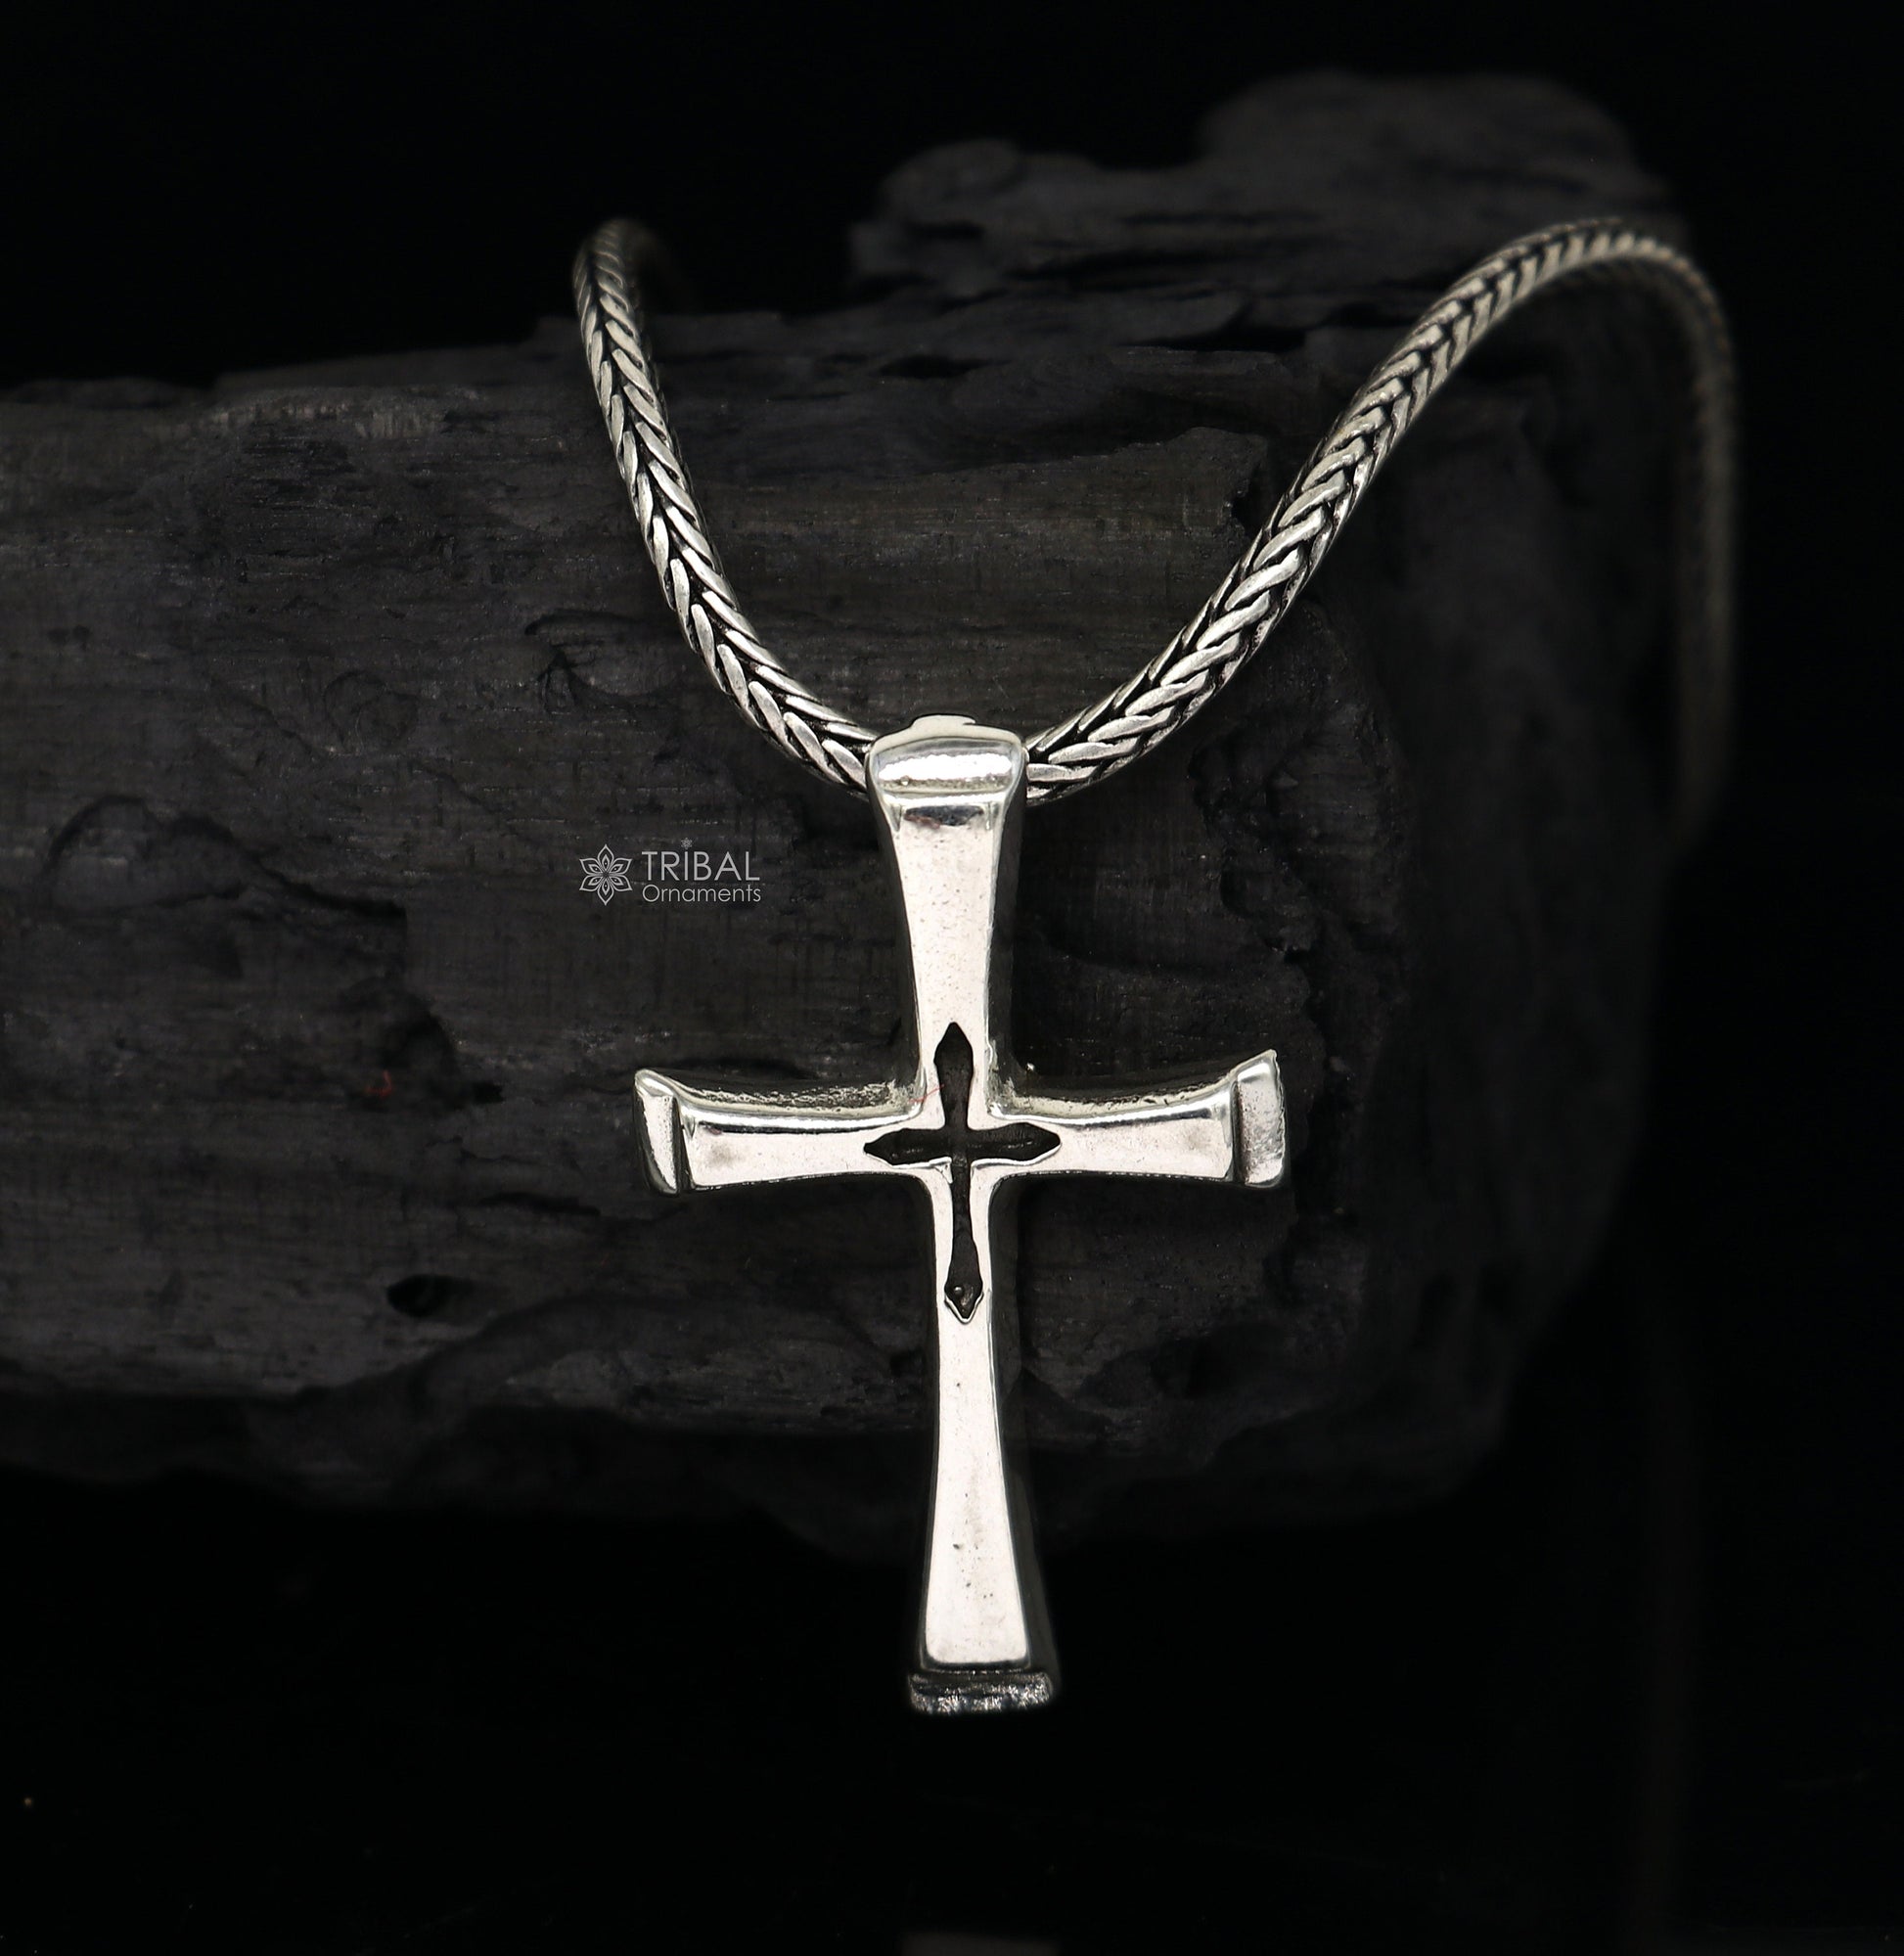 Rnivida 925 Sterling Silver Cross Pendant Necklace with Stainless Steel Wheat Chain for Men - Choice of Lengths